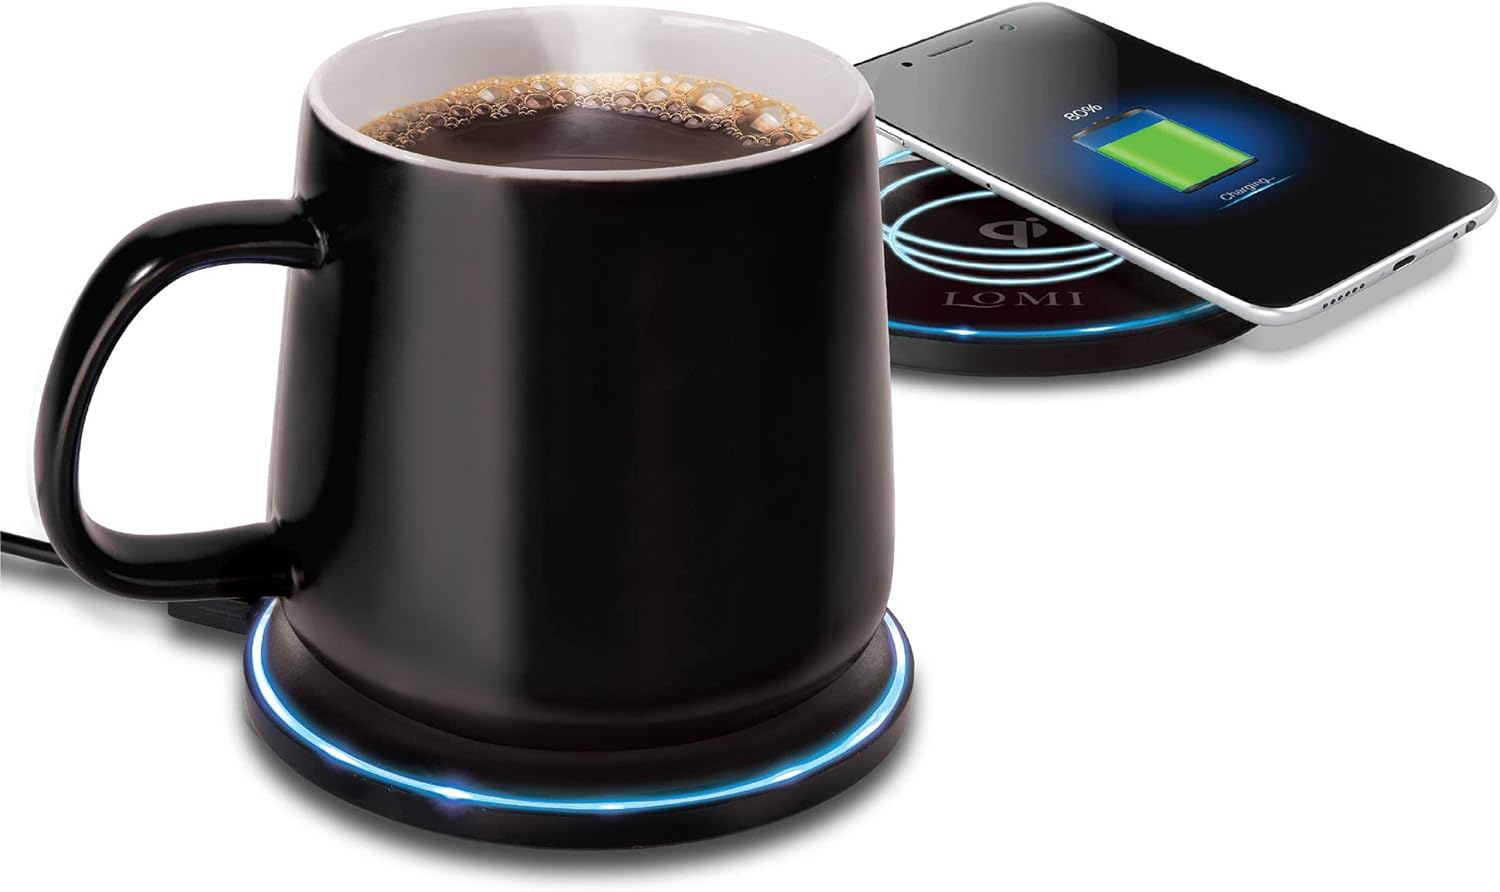 Lomi 2 in 1 Smart Mug Warmer and Qi Wireless Charger